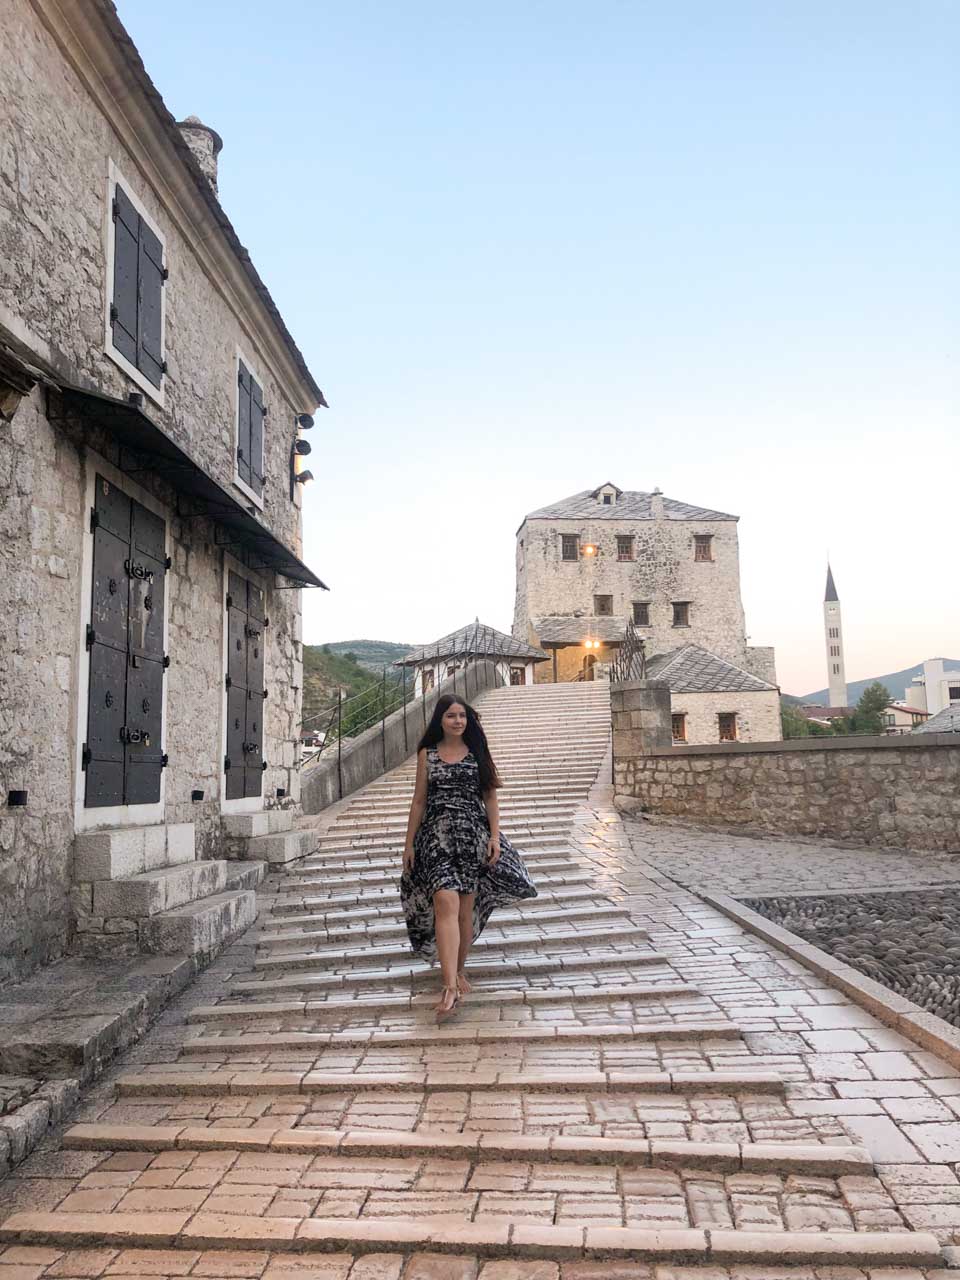 A girl in a black and white maxi dress walking down Mostar's Old Bridge (Stari Most) towards the camera